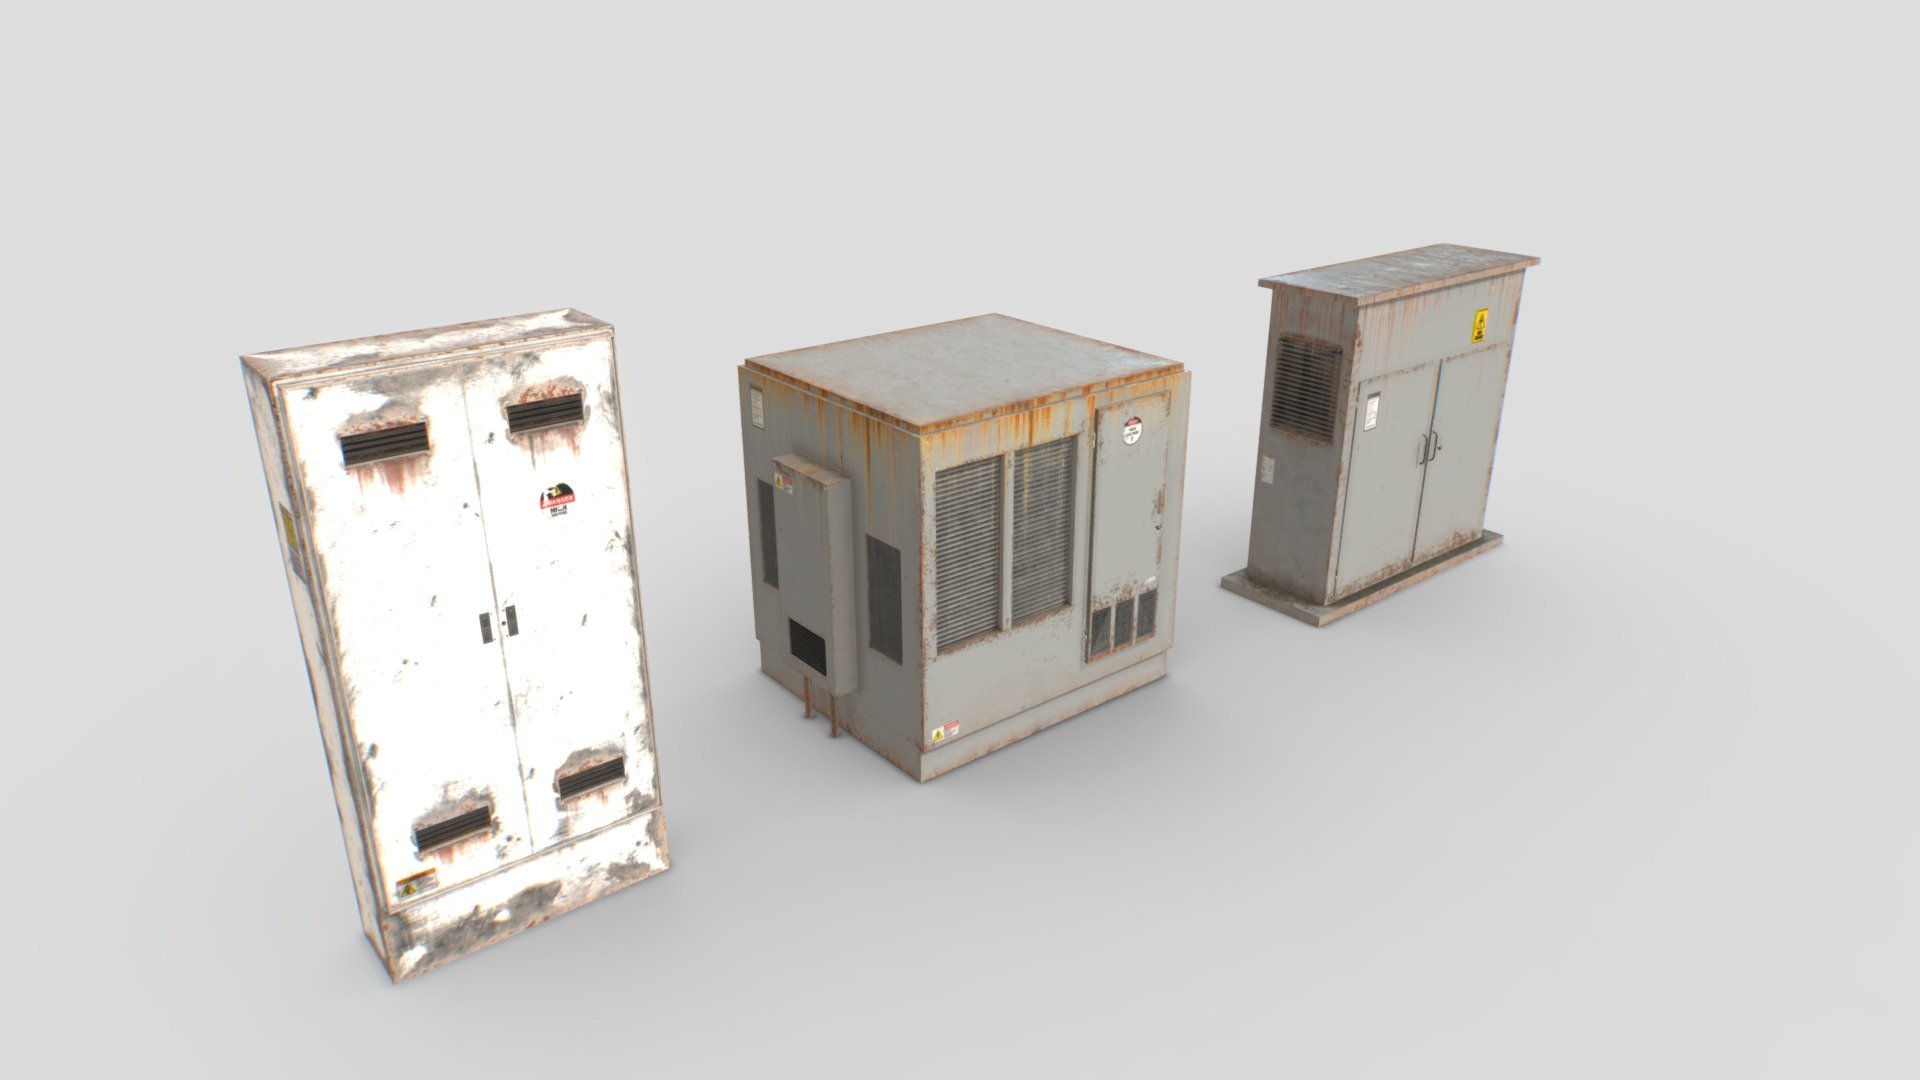 Old electrical box transformers. Real scale. 9 objects and 56 materials in total..

Comes with 3 sets of textures each with 4096x PBR textures including Albedo, Normal, Metalness, Roughness and AO. ARM mask texture included (ao, rough, metal) and also unity HDRP mask (M, A, D, S).

Total tris 14000. 8000 verts.

Suitable for apocalyptic games, stalker type, wastelands, old landscapes, etc. 3d model